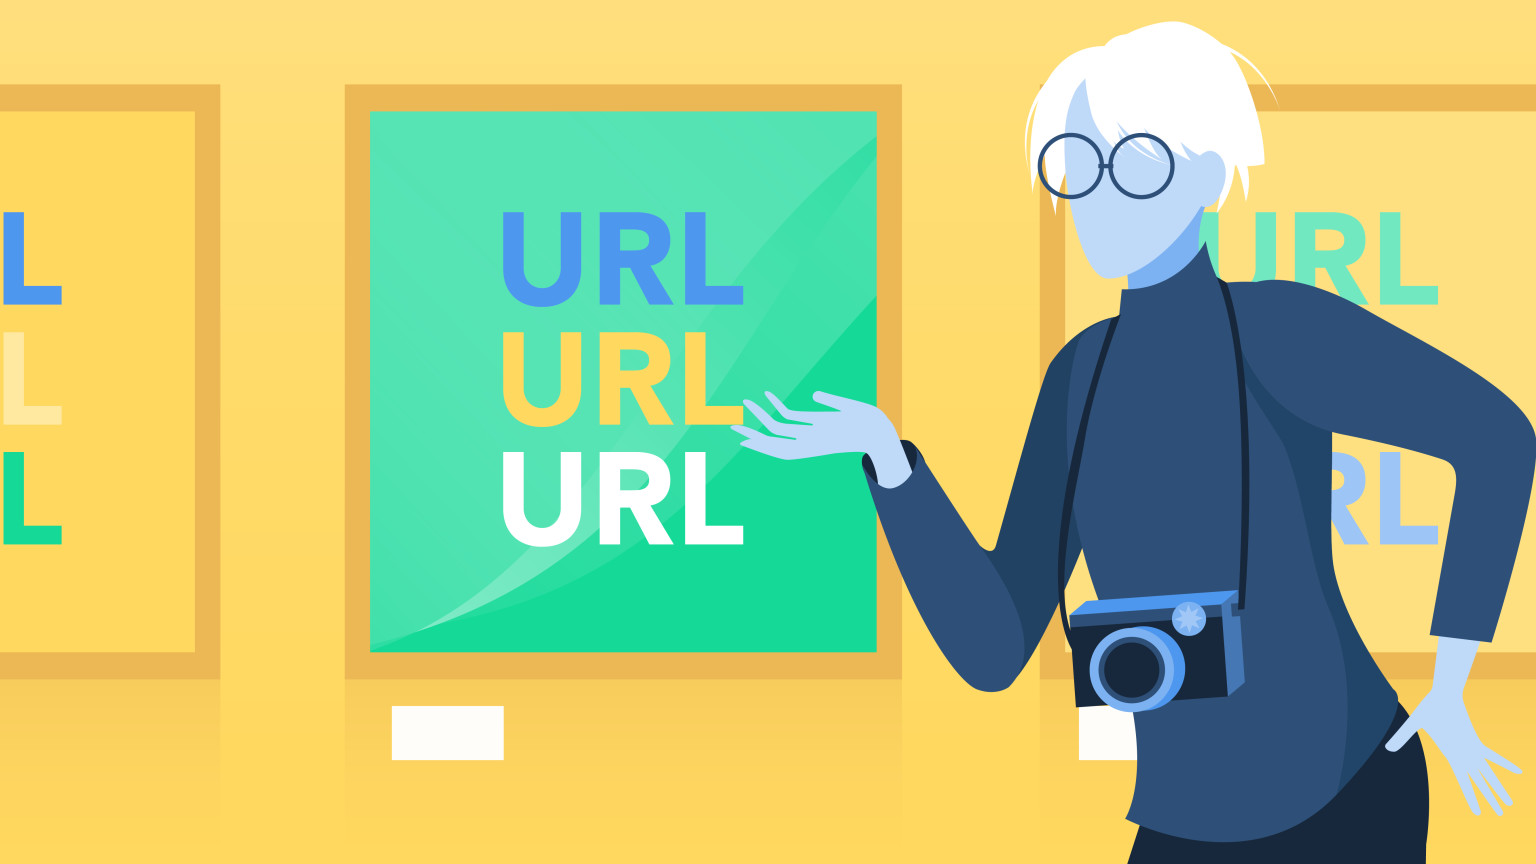 How to write URLs properly and add value to your site | Contentful